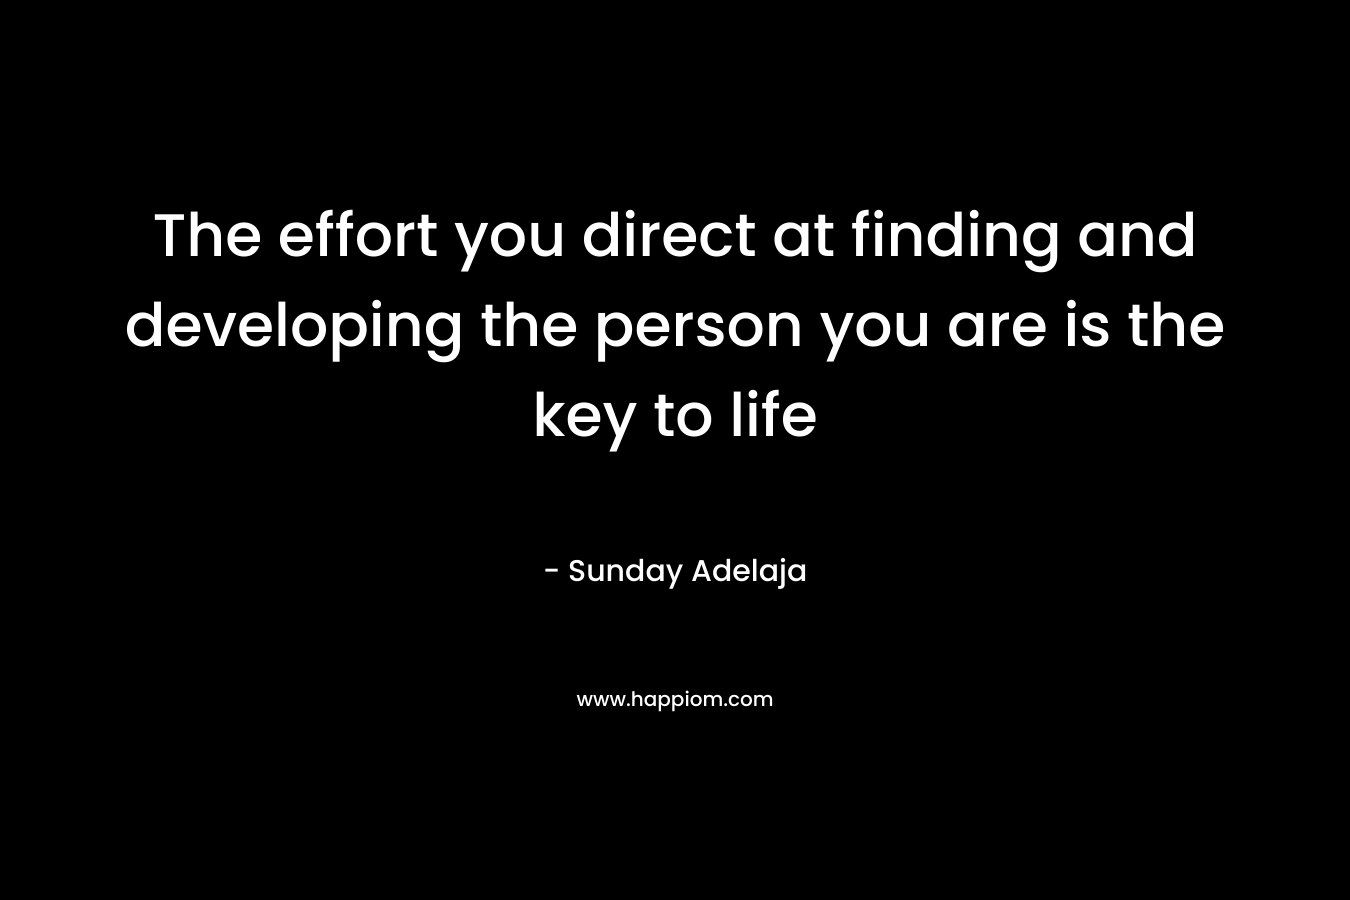 The effort you direct at finding and developing the person you are is the key to life